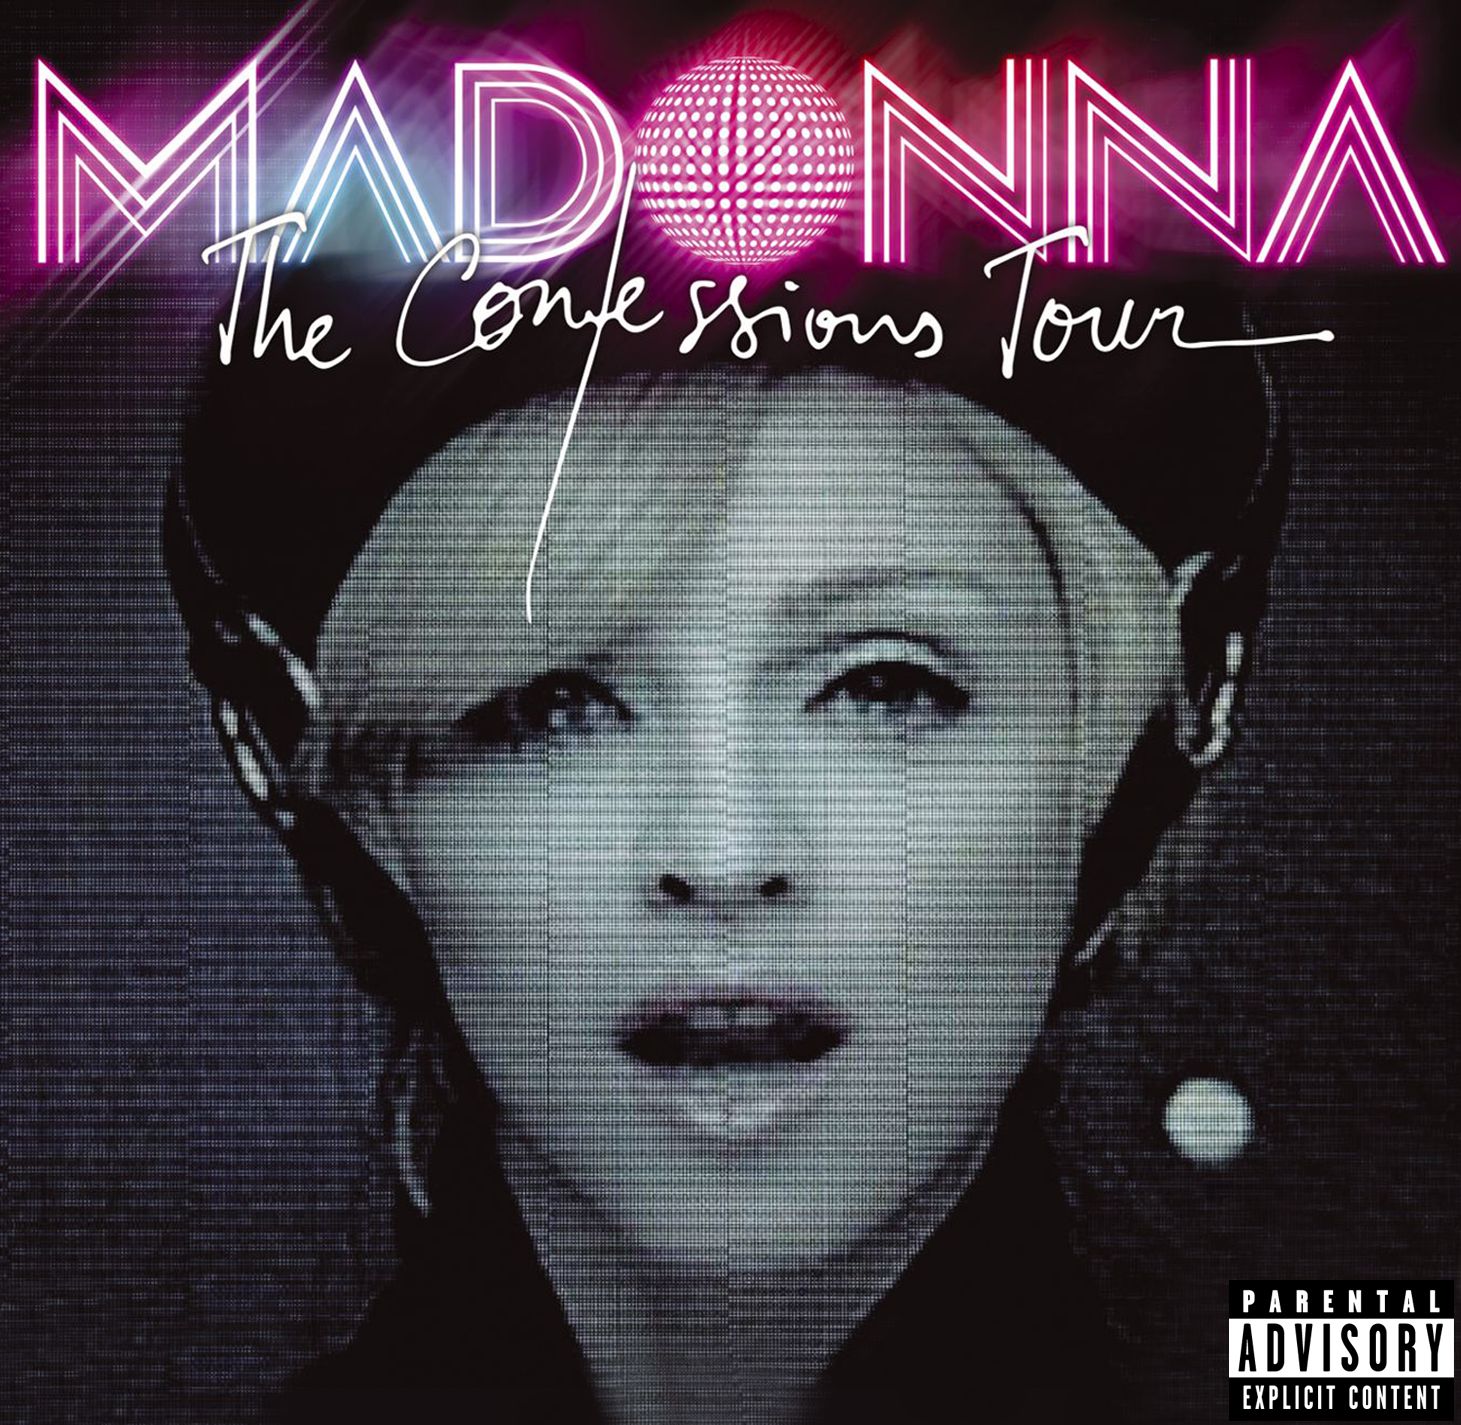 The Confessions Tour (Int'l Only DMD)